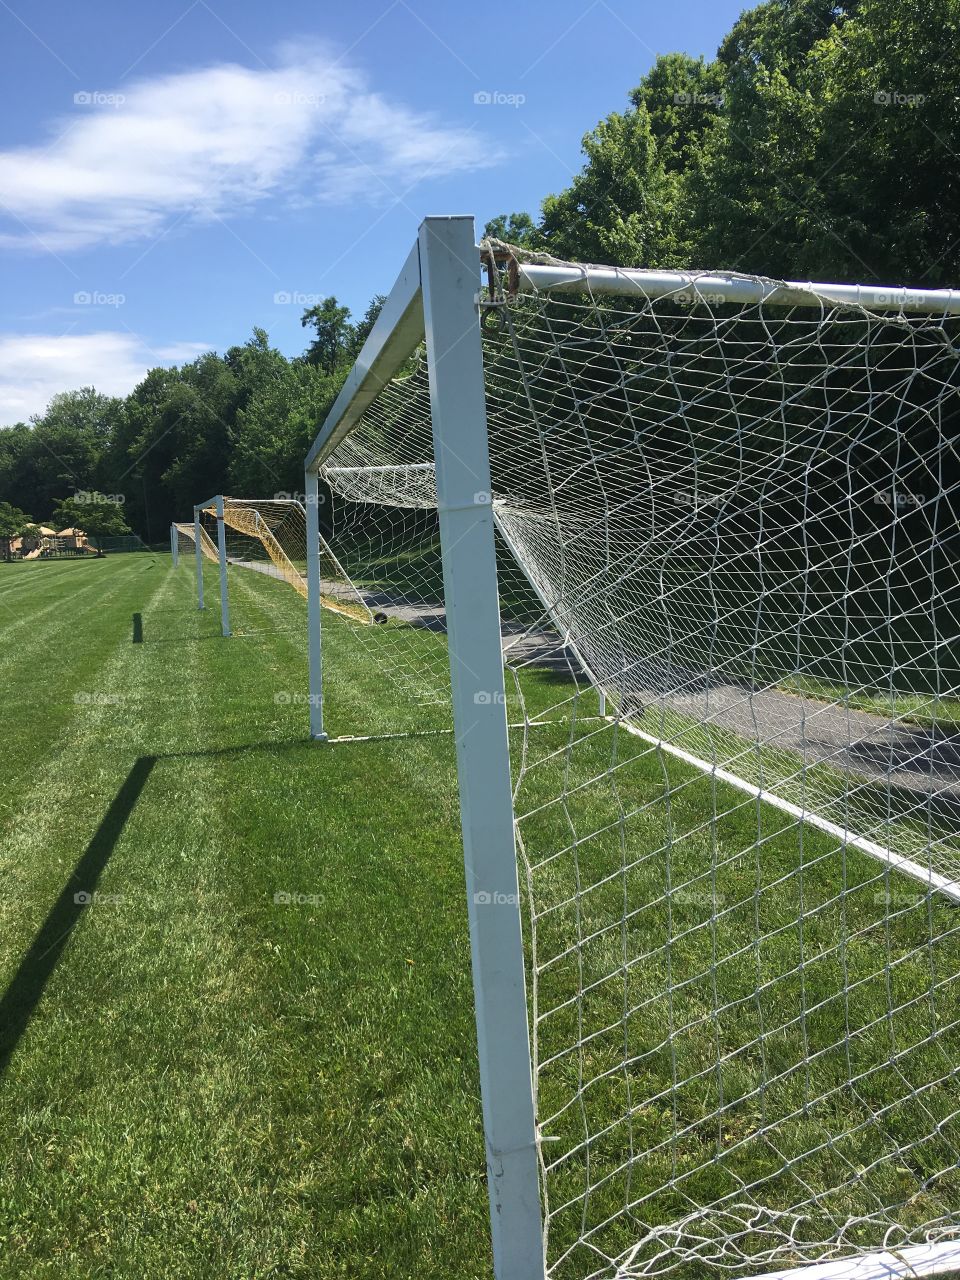 Soccer goals ready to be scored on